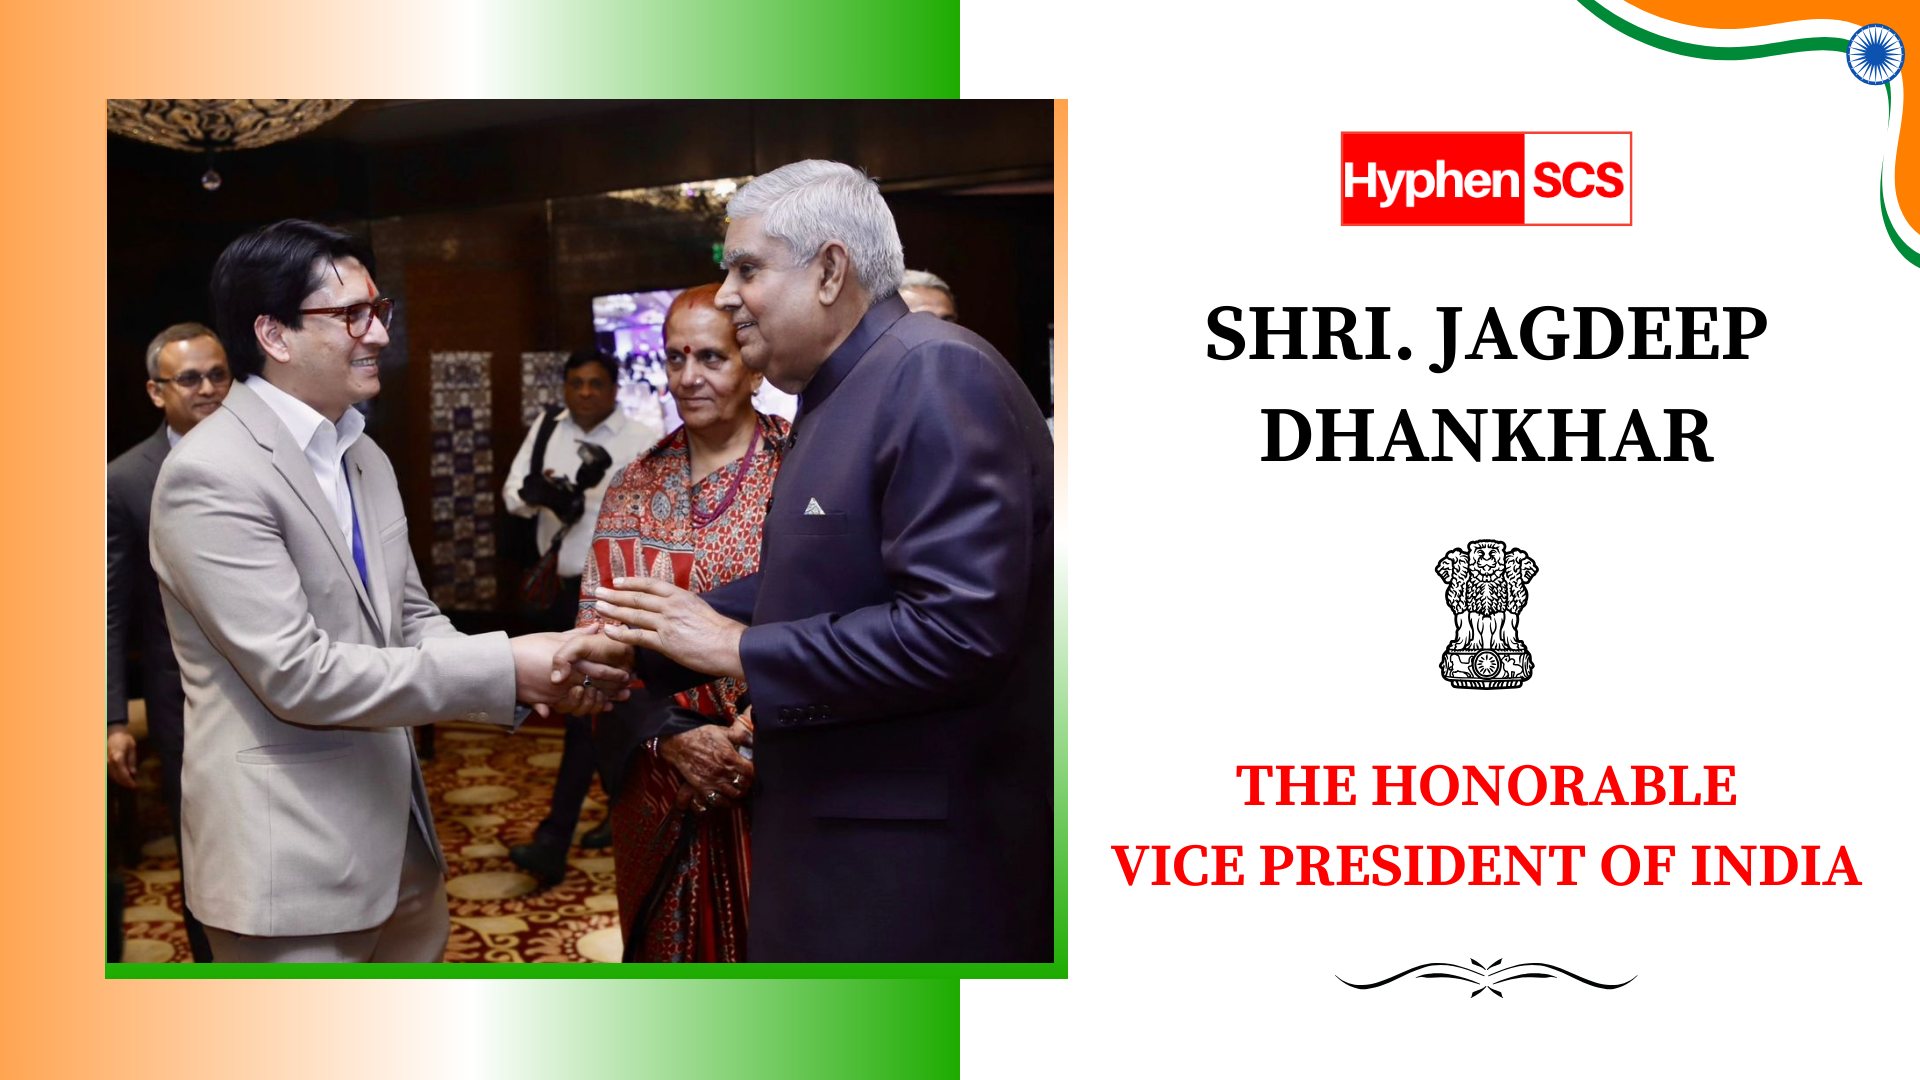 Hyphen SCS’s Interaction with India’s Vice President: A Step Towards Transforming Logistics